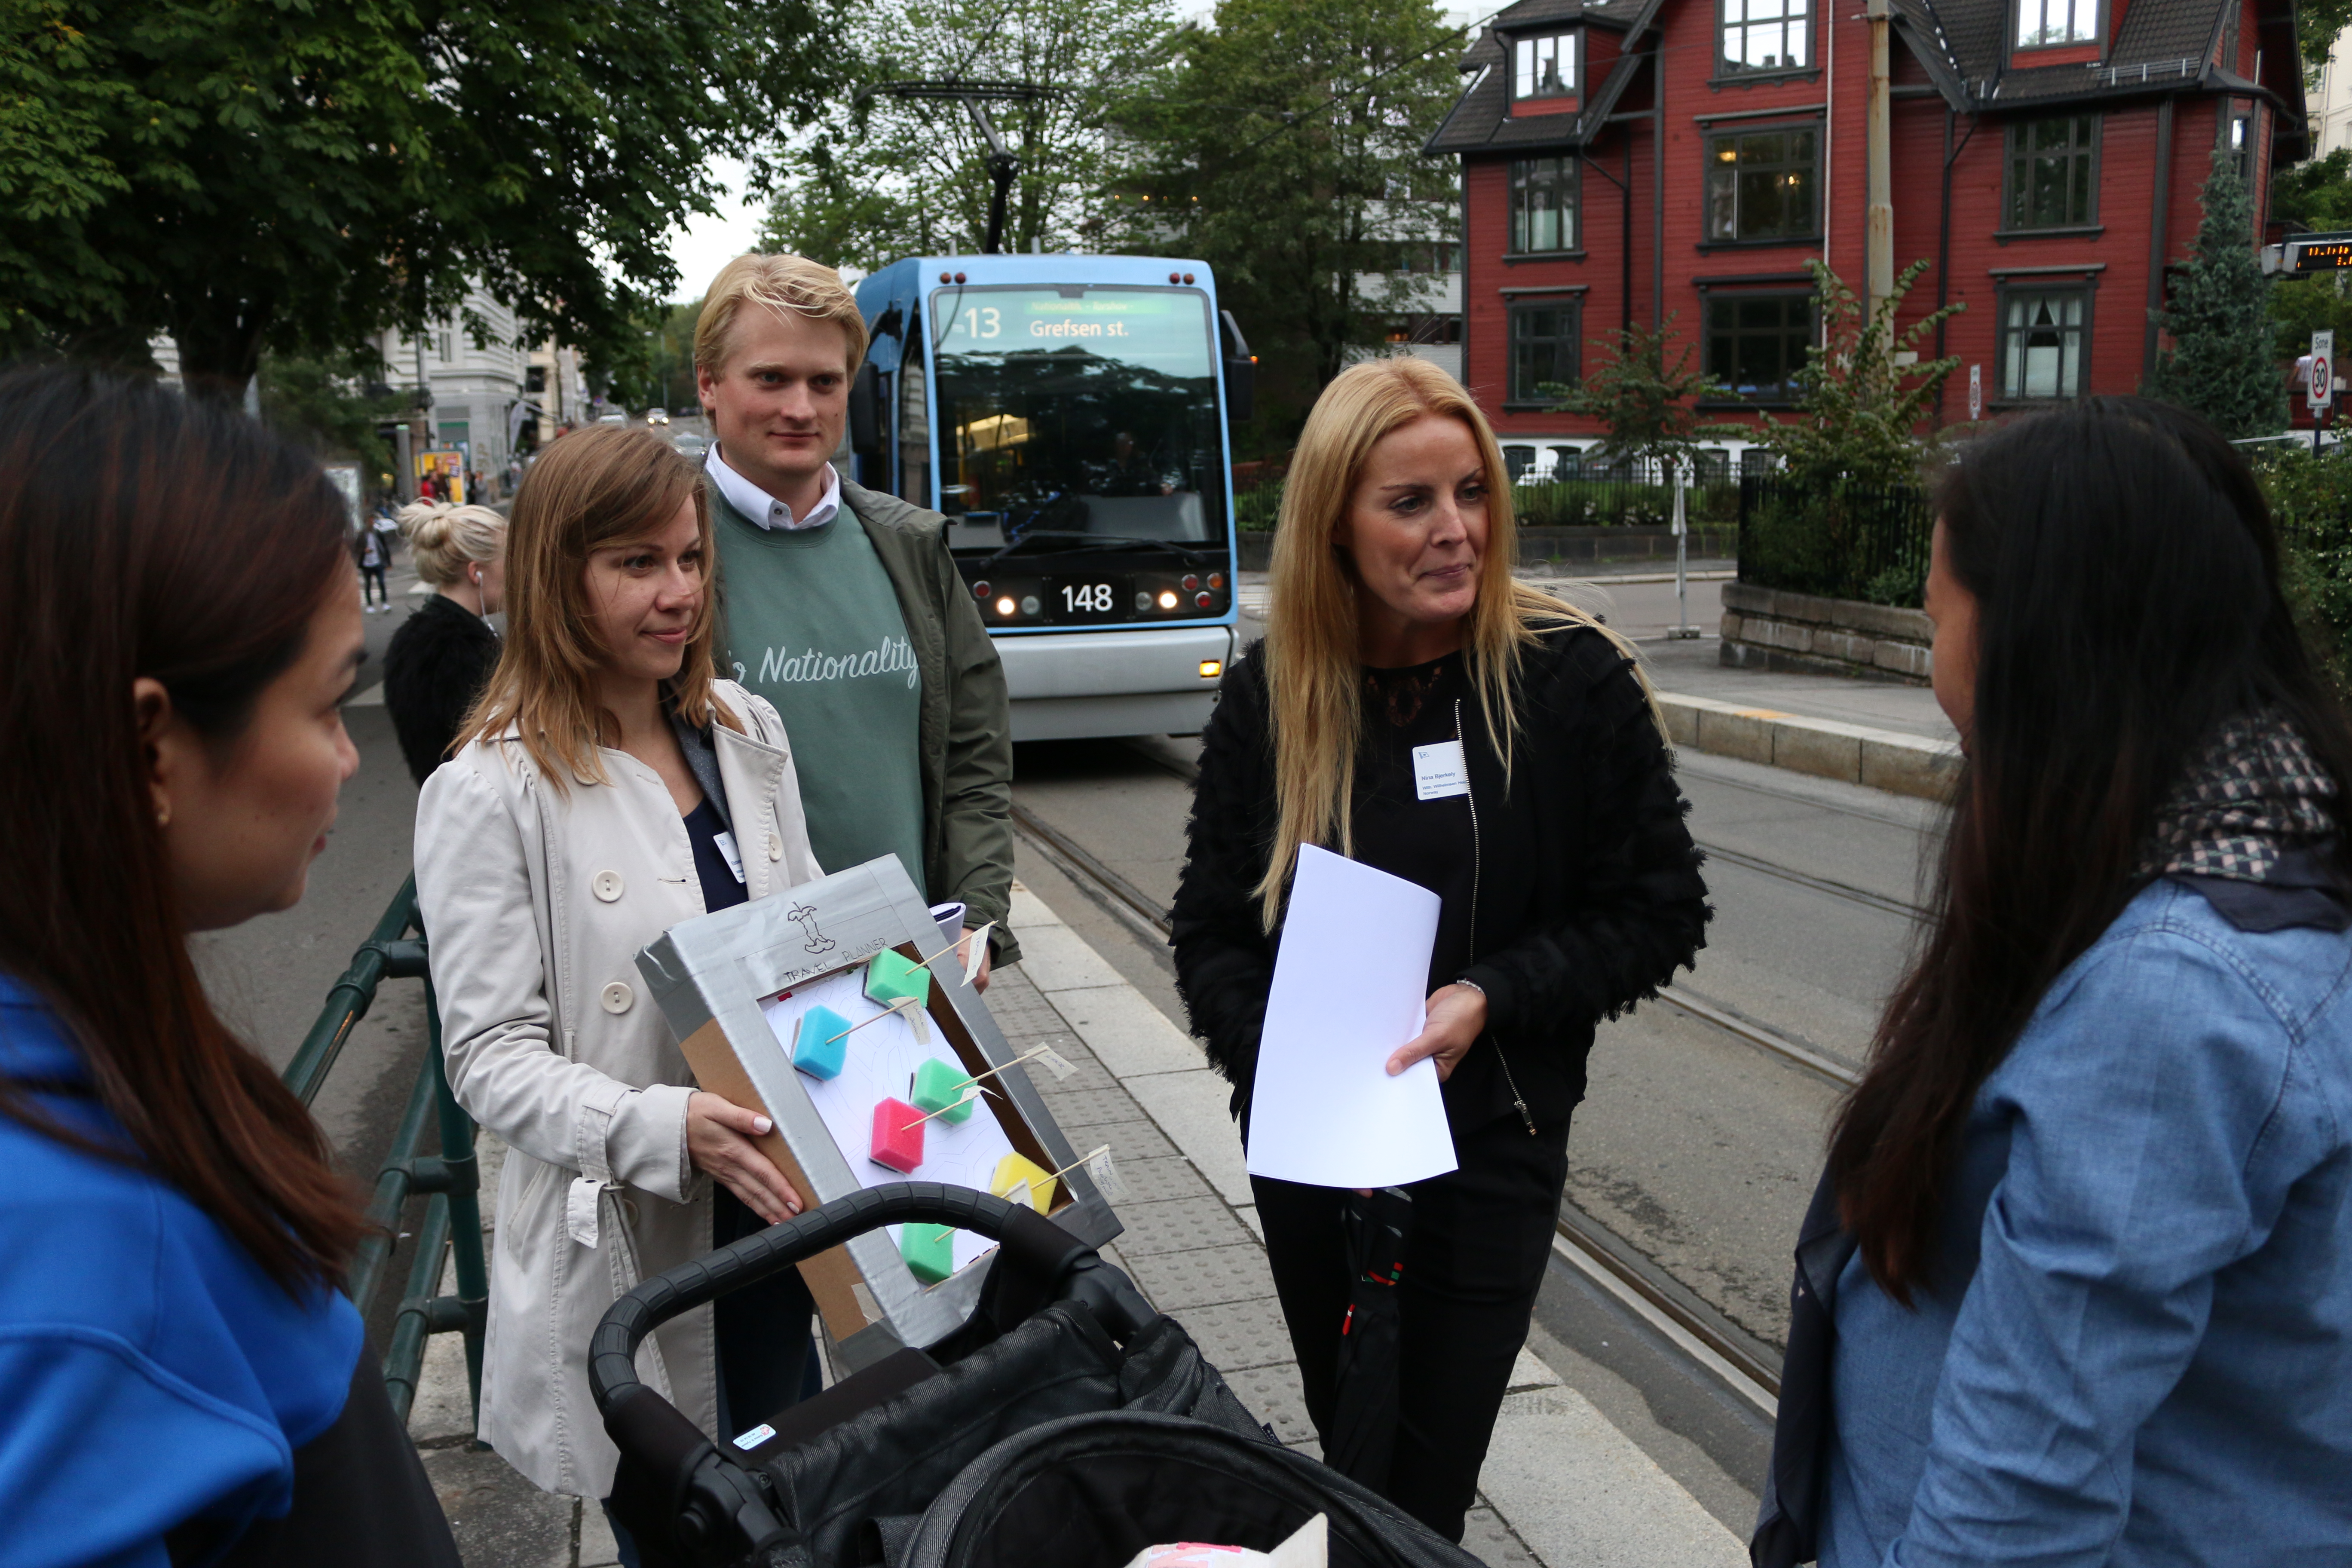 Some of the LePo candidates talking to users of the Oslo public transport system, proposing a solution prototype to test the user experience and sentiment.